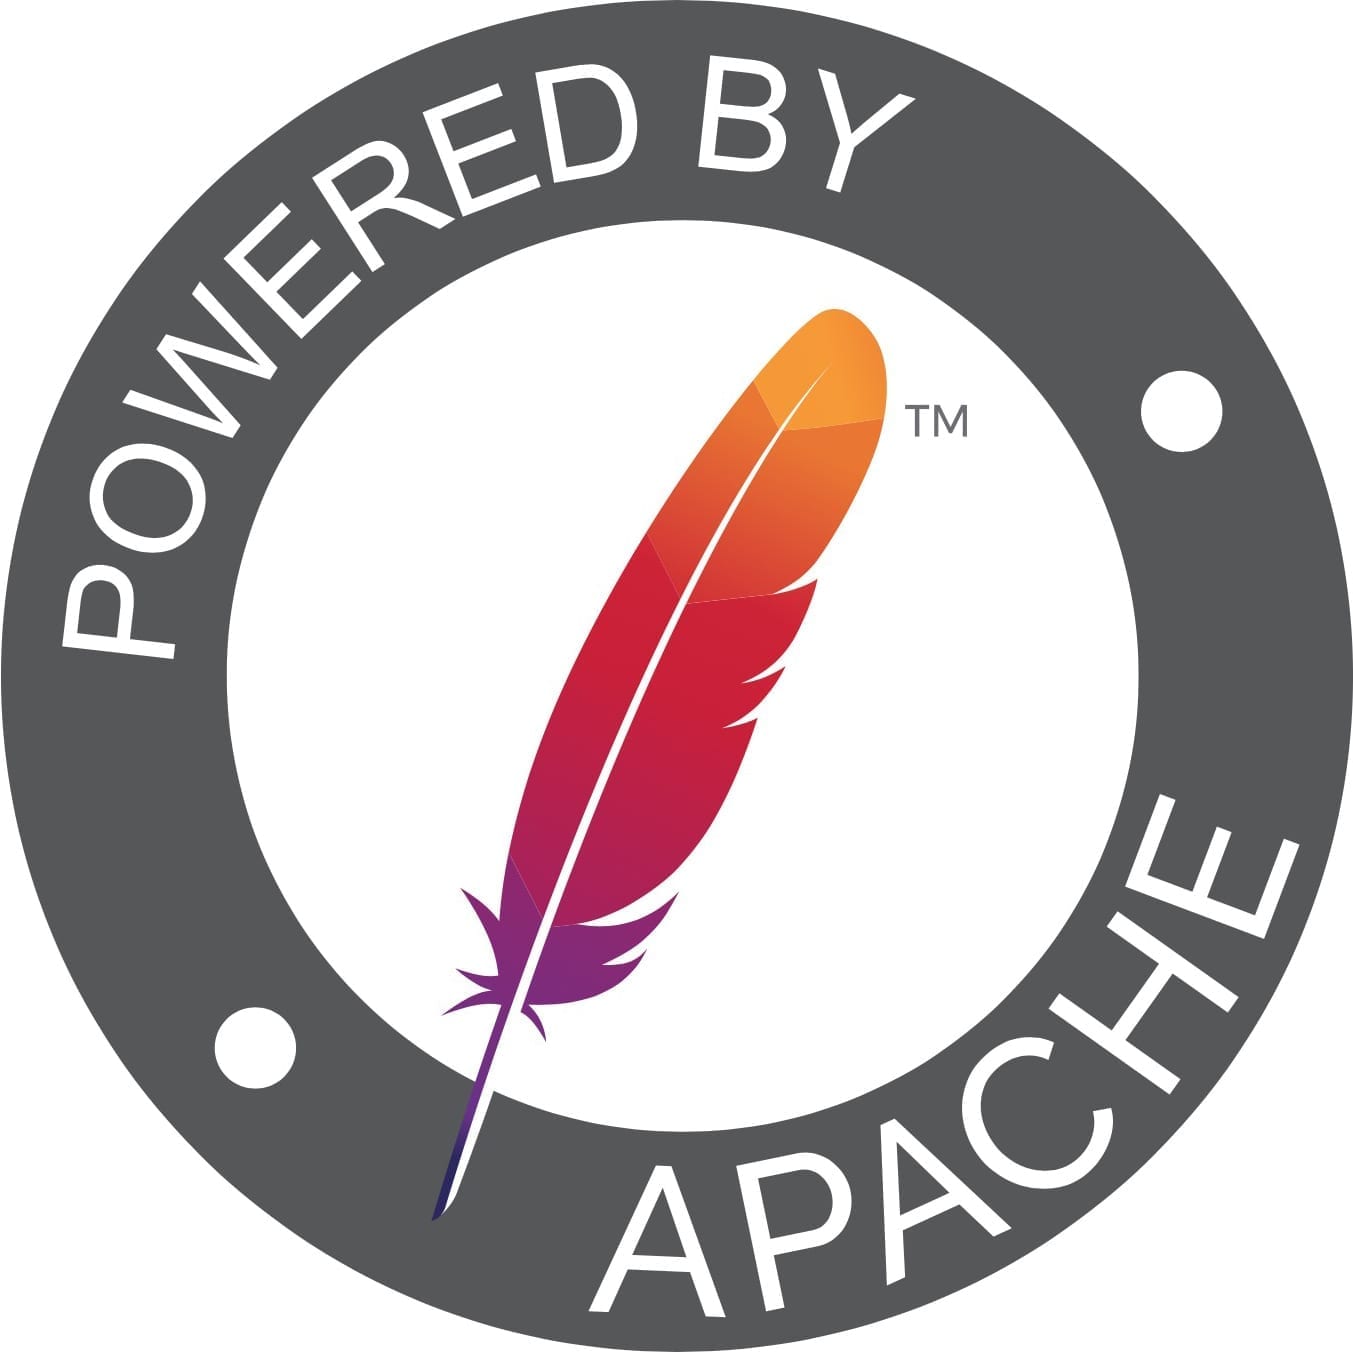 How to host a website on Raspberry Pi with Apache